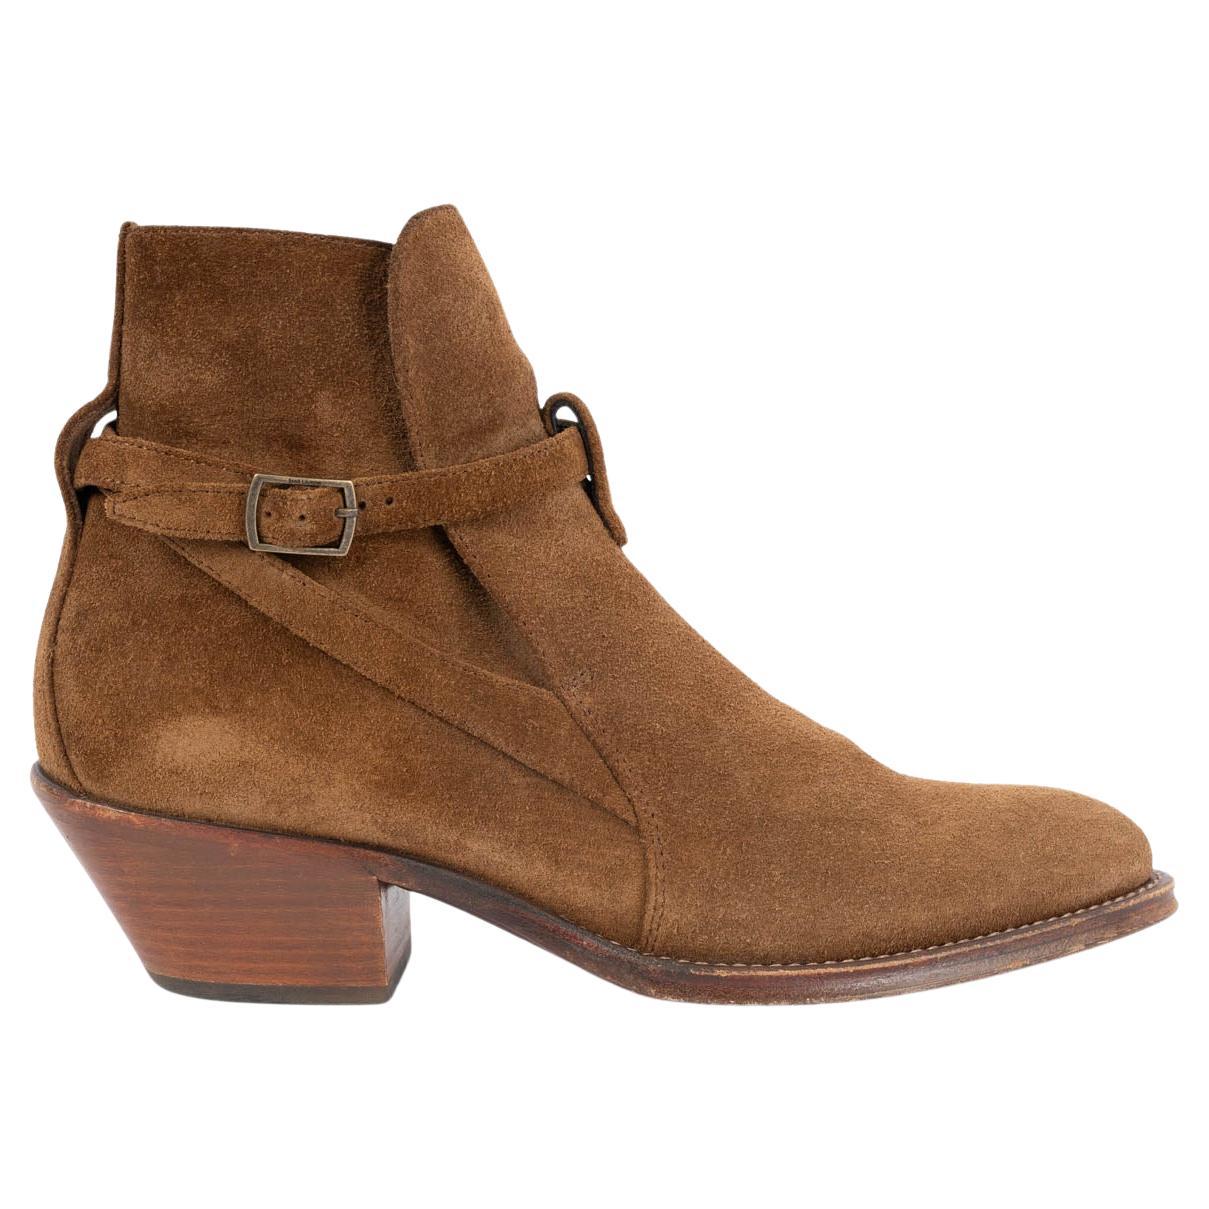 SAINT LAURENT Land brown suede RATCHED 45 WESTERN Ankle Boots Shoes 37 For Sale